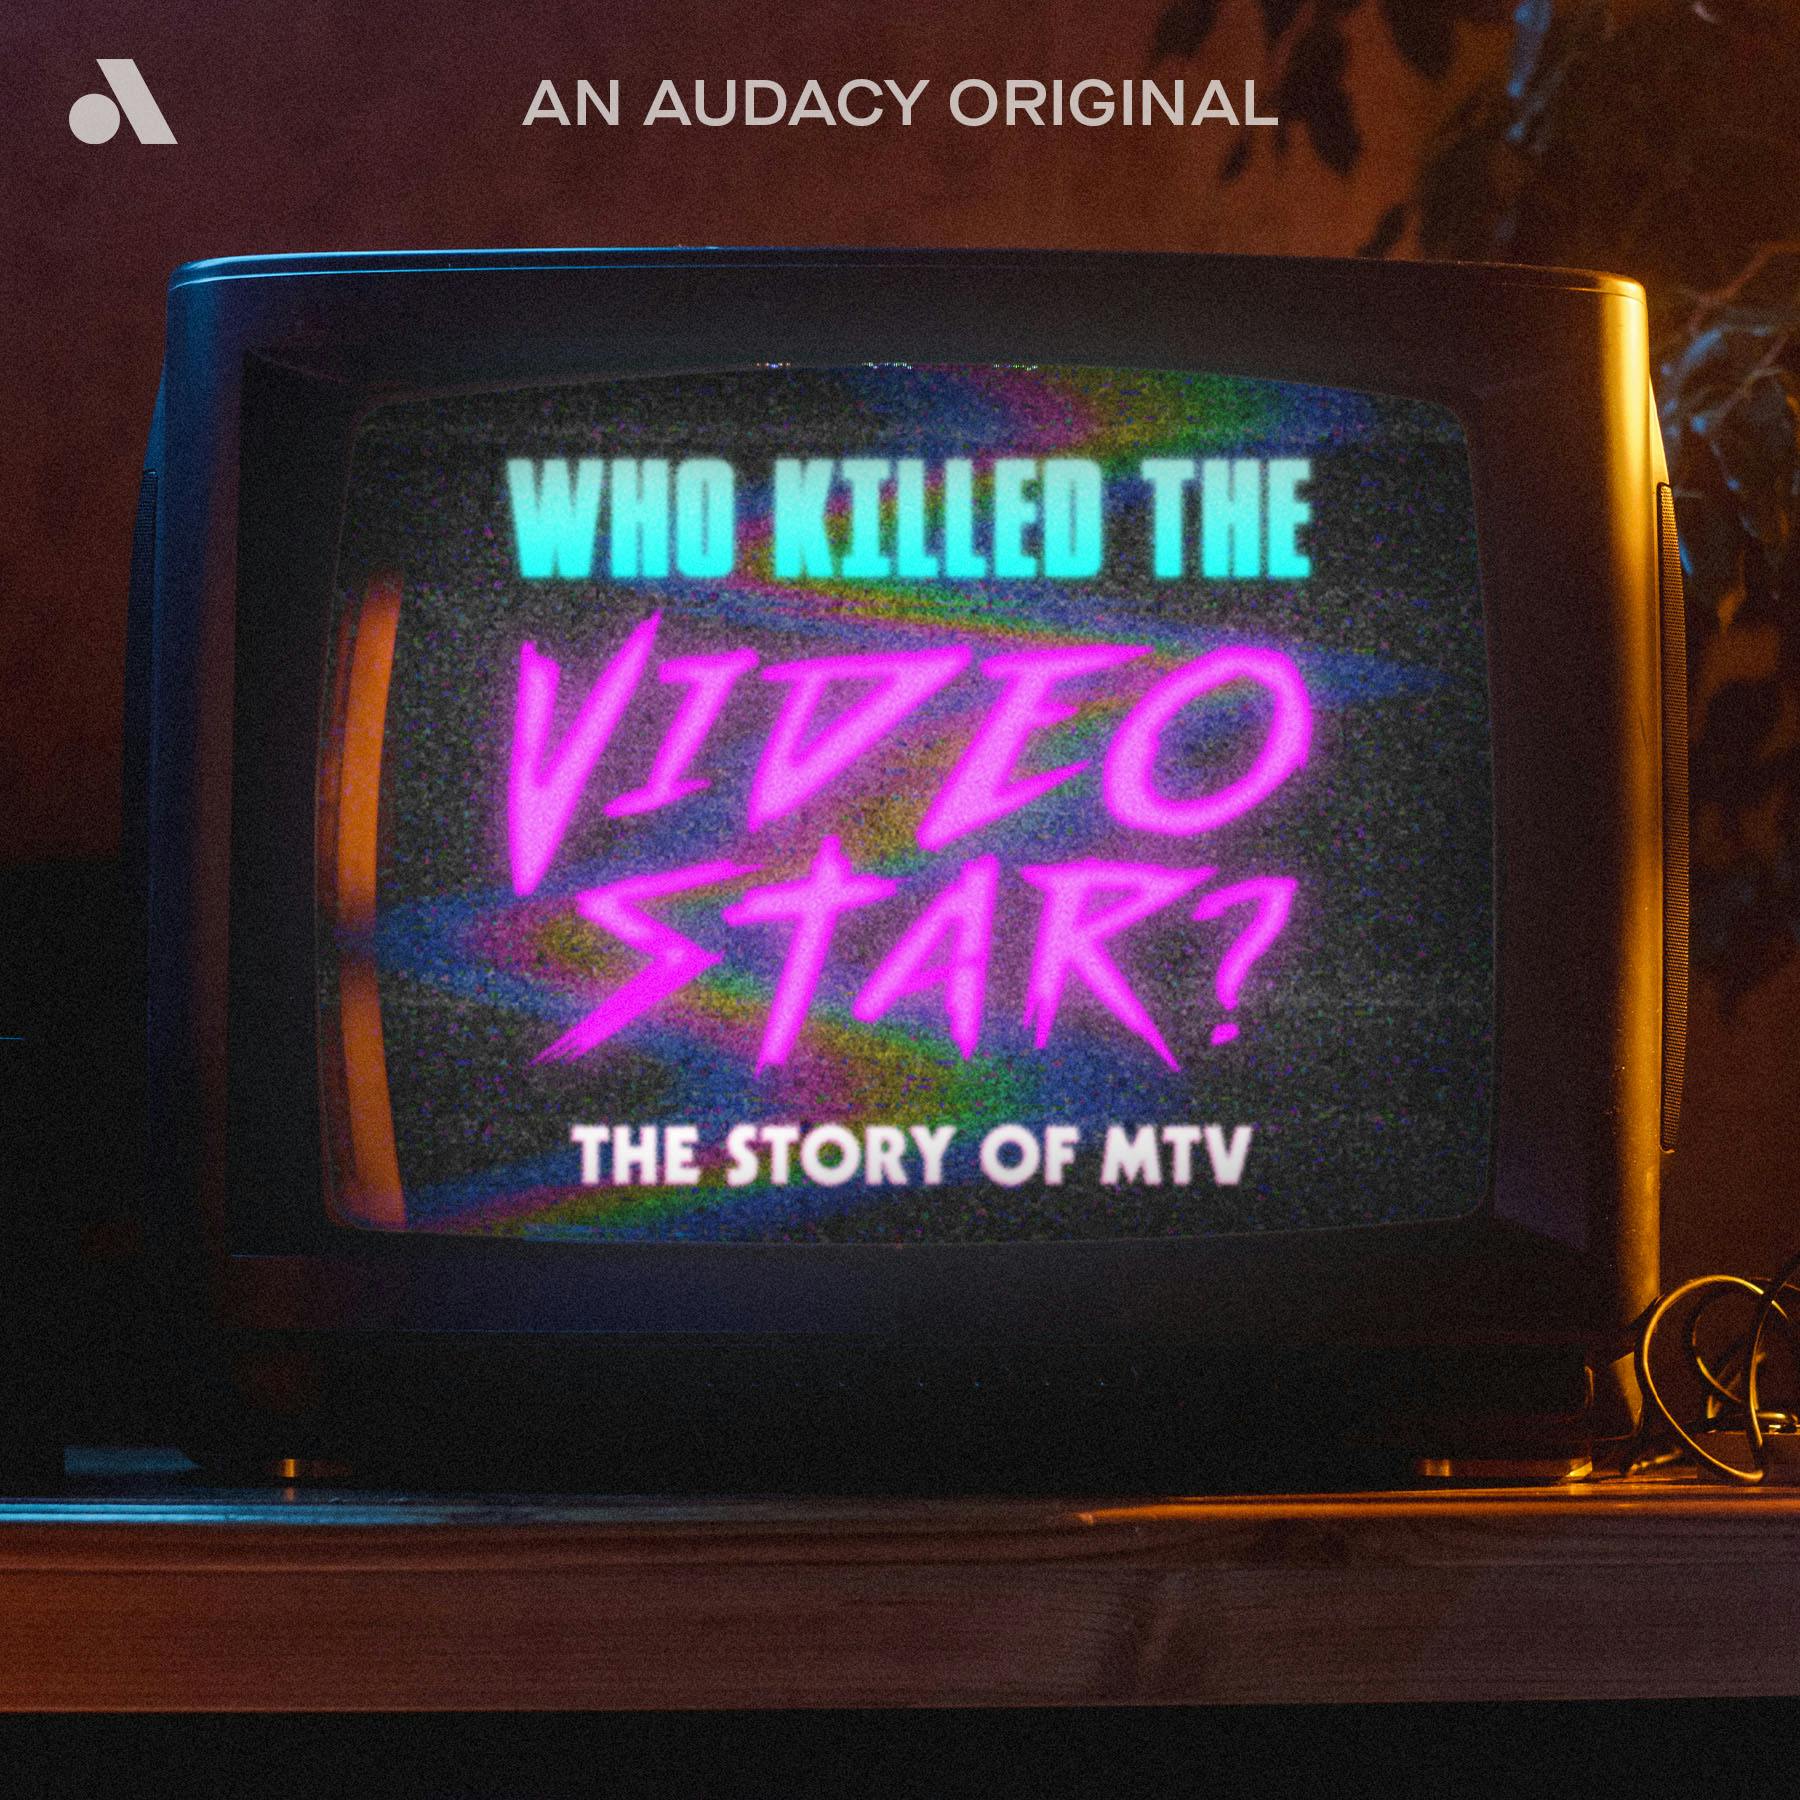 Who Killed the Video Star: The Story of MTV | I Want My MTV! by Audacy Studios